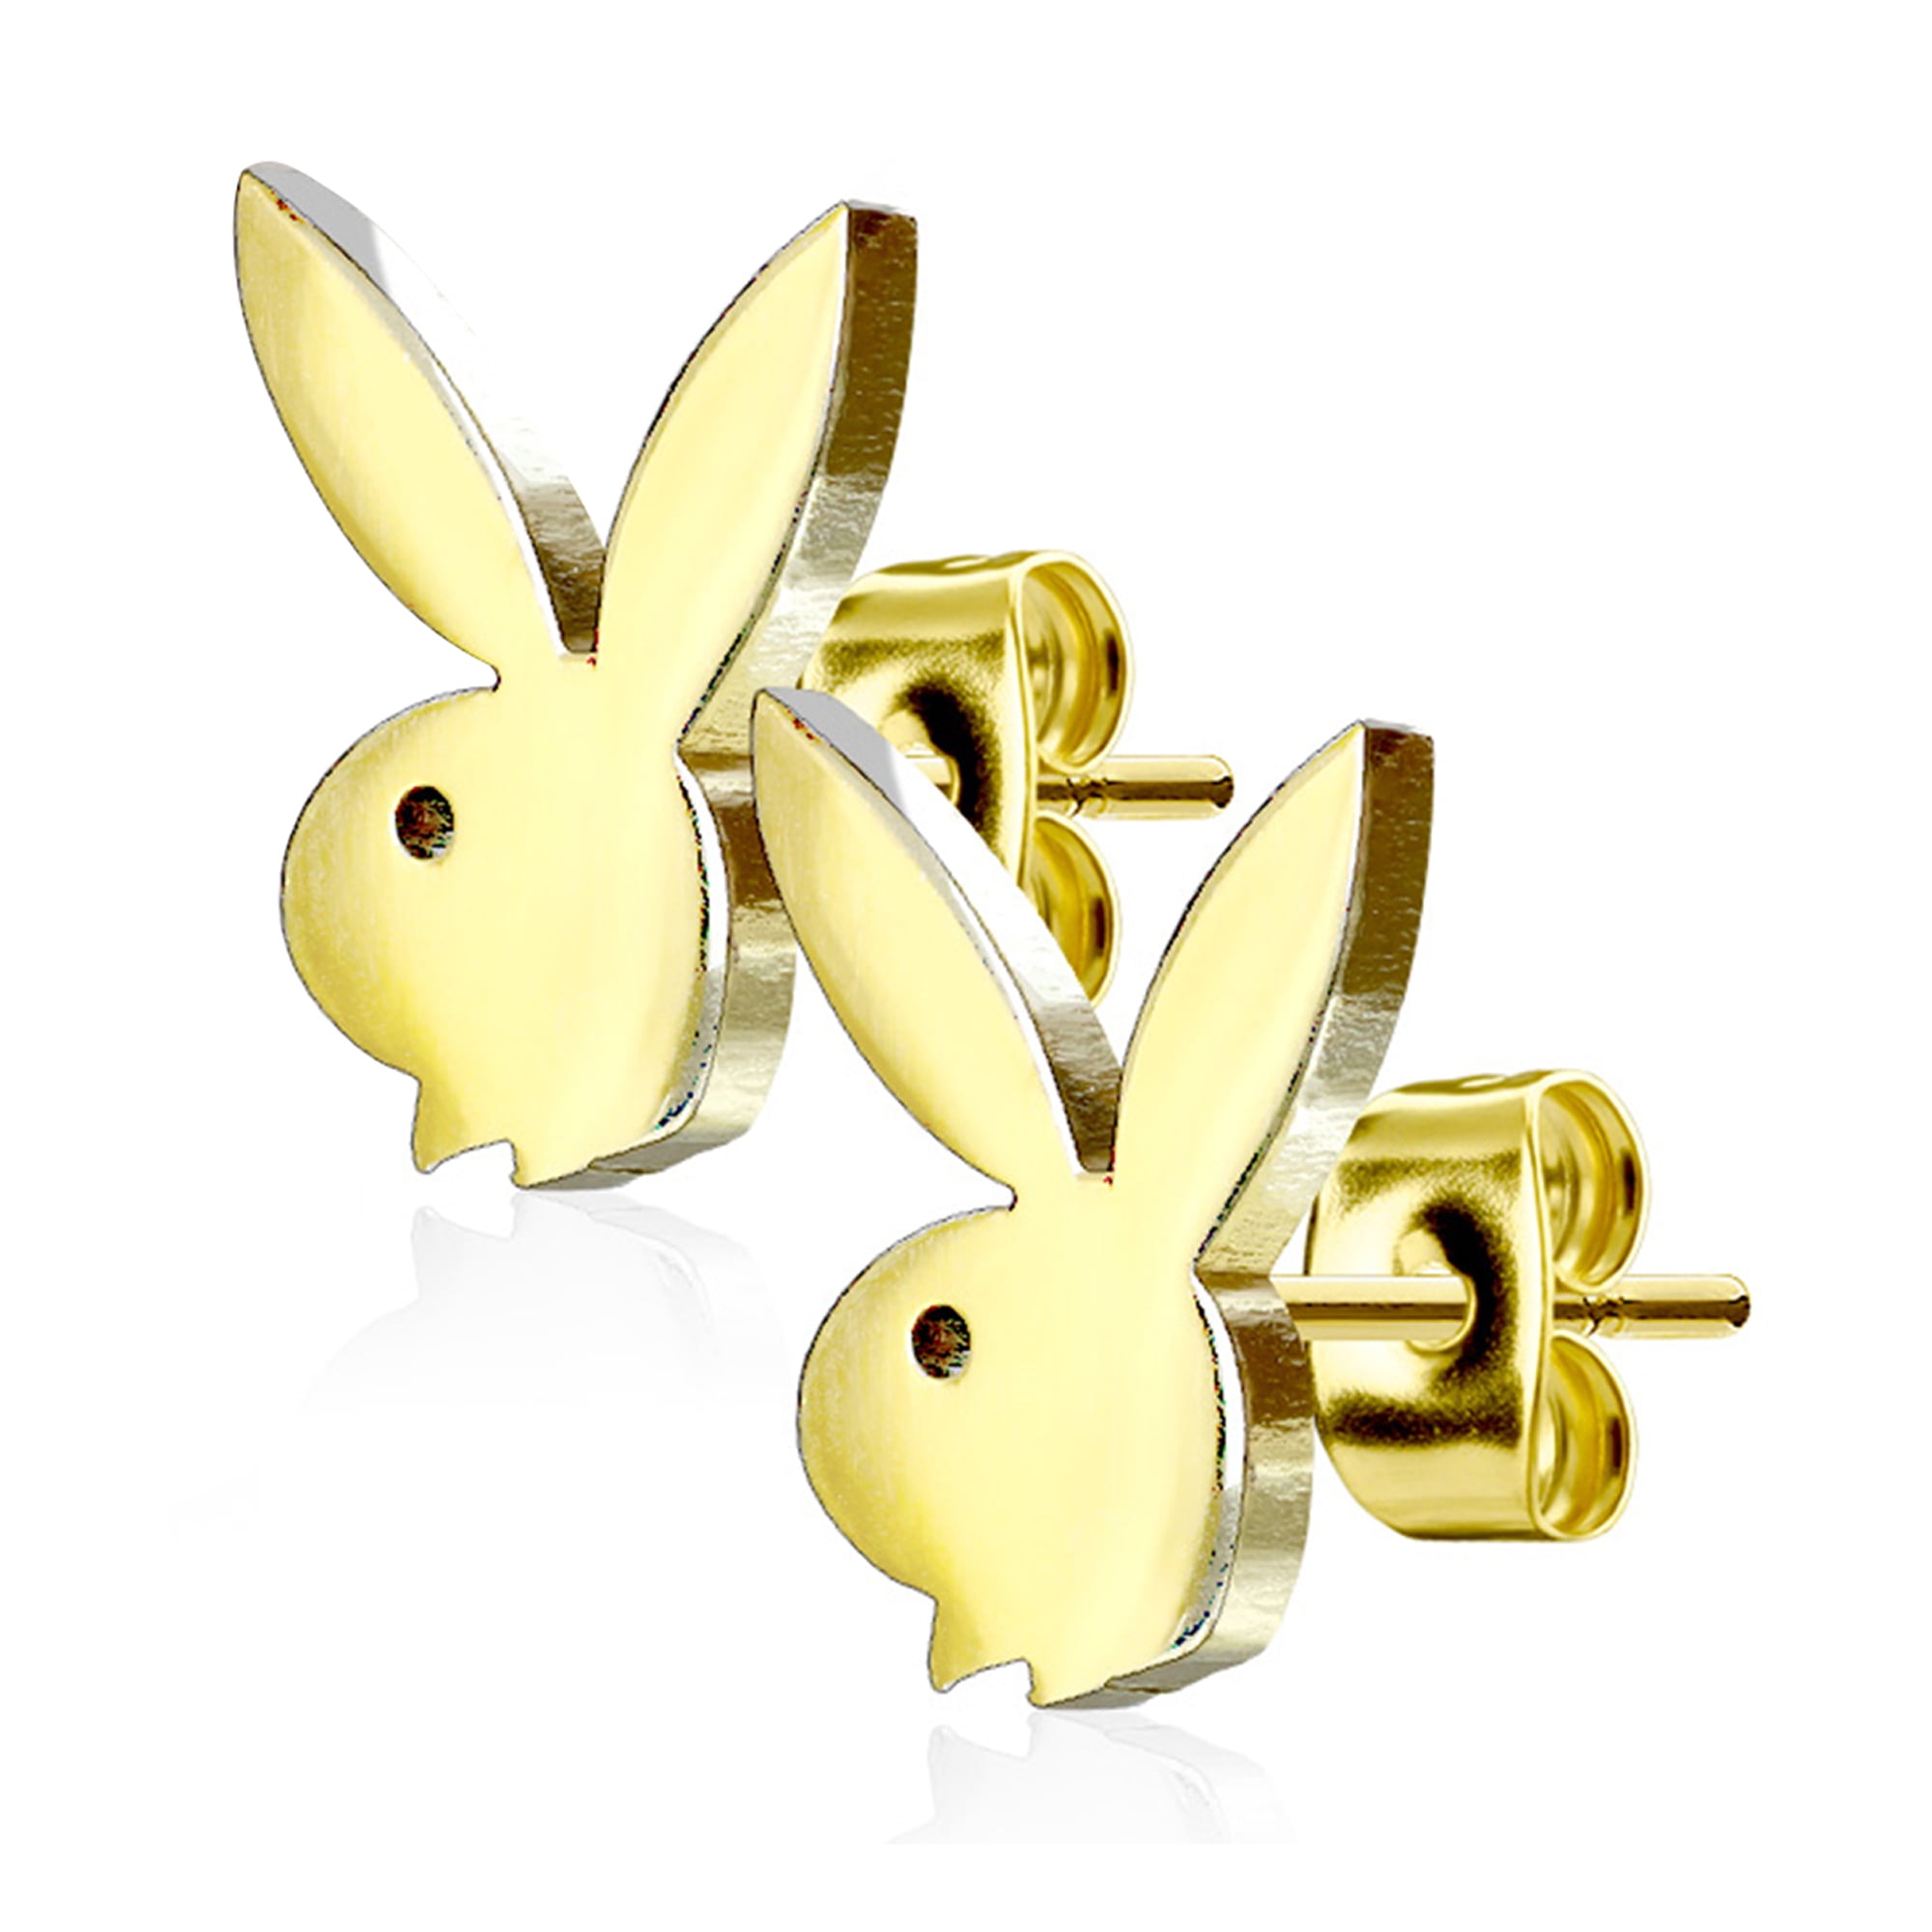 Sold Per Piece Dynamique Playboy Bunny Top 316L Surgical Steel Nose Bone Stud Ring 